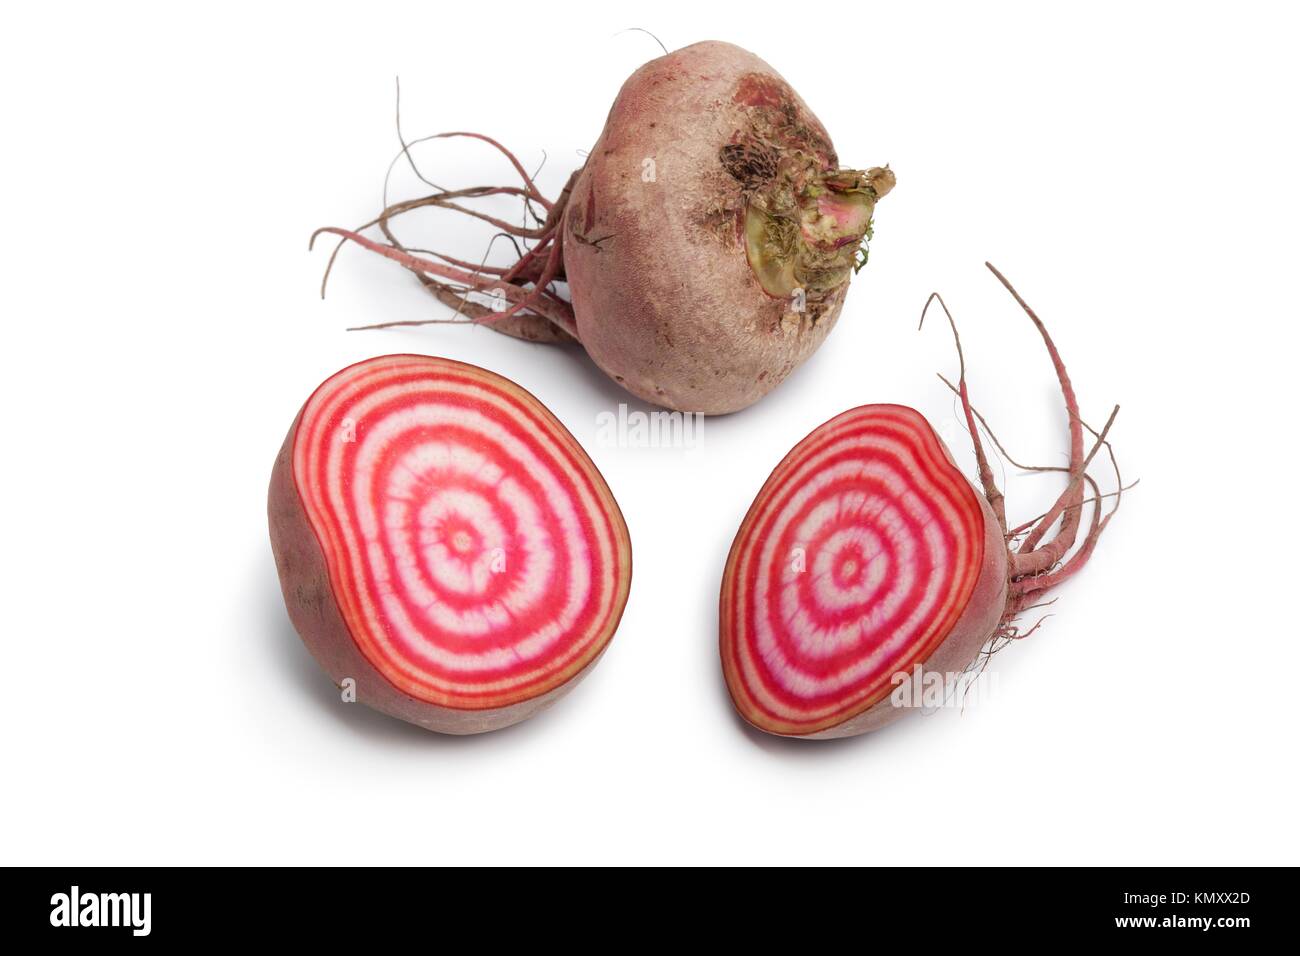 Whole and partial chioggia beets on white background Stock Photo